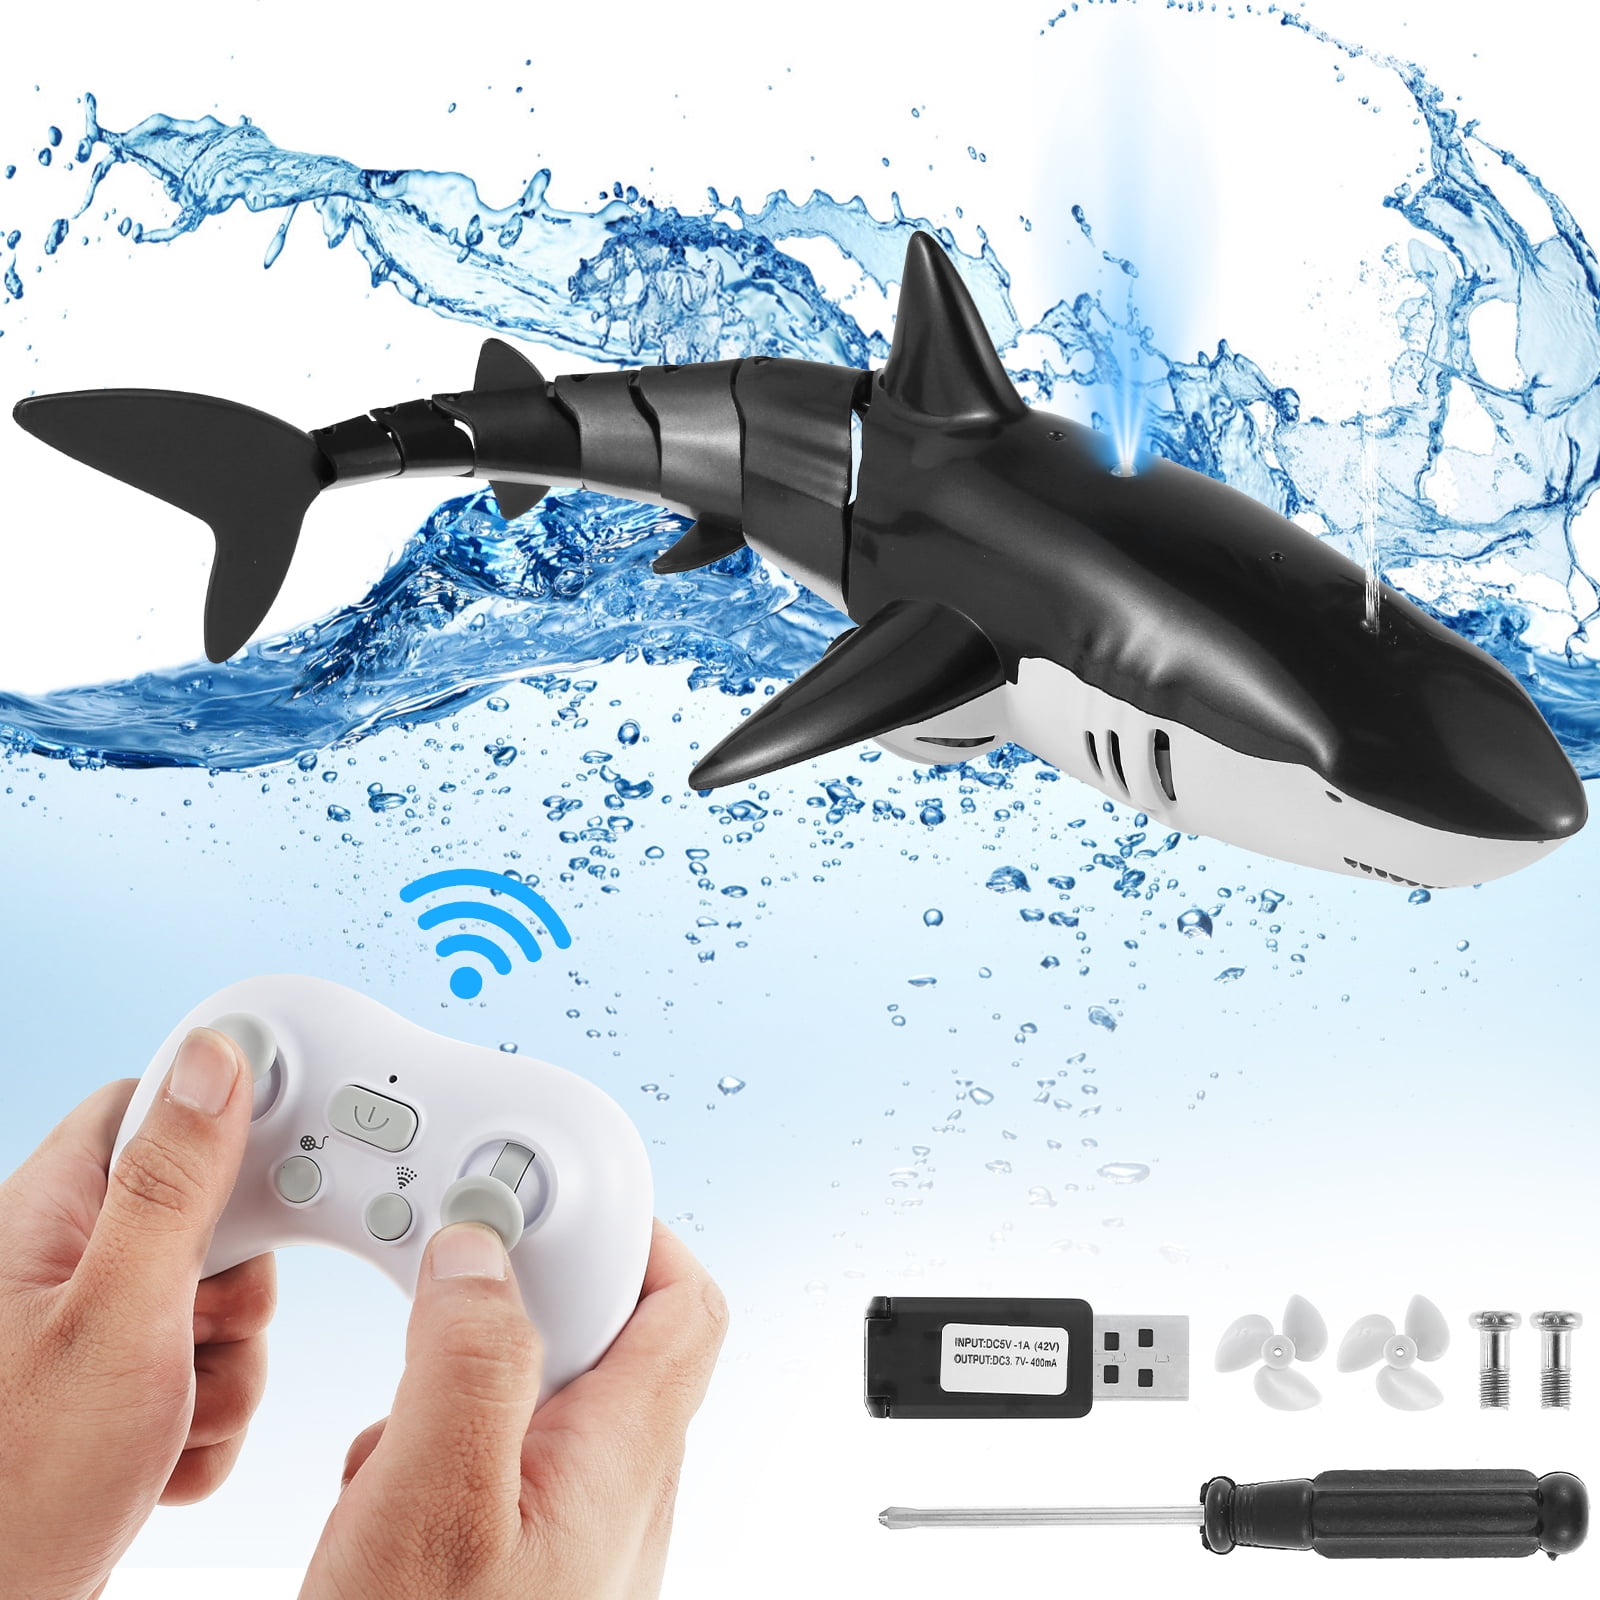 Gpoty 15” Remote Control Shark Toy 2.4Ghz RC Shark Pool Toy 500mAh ...